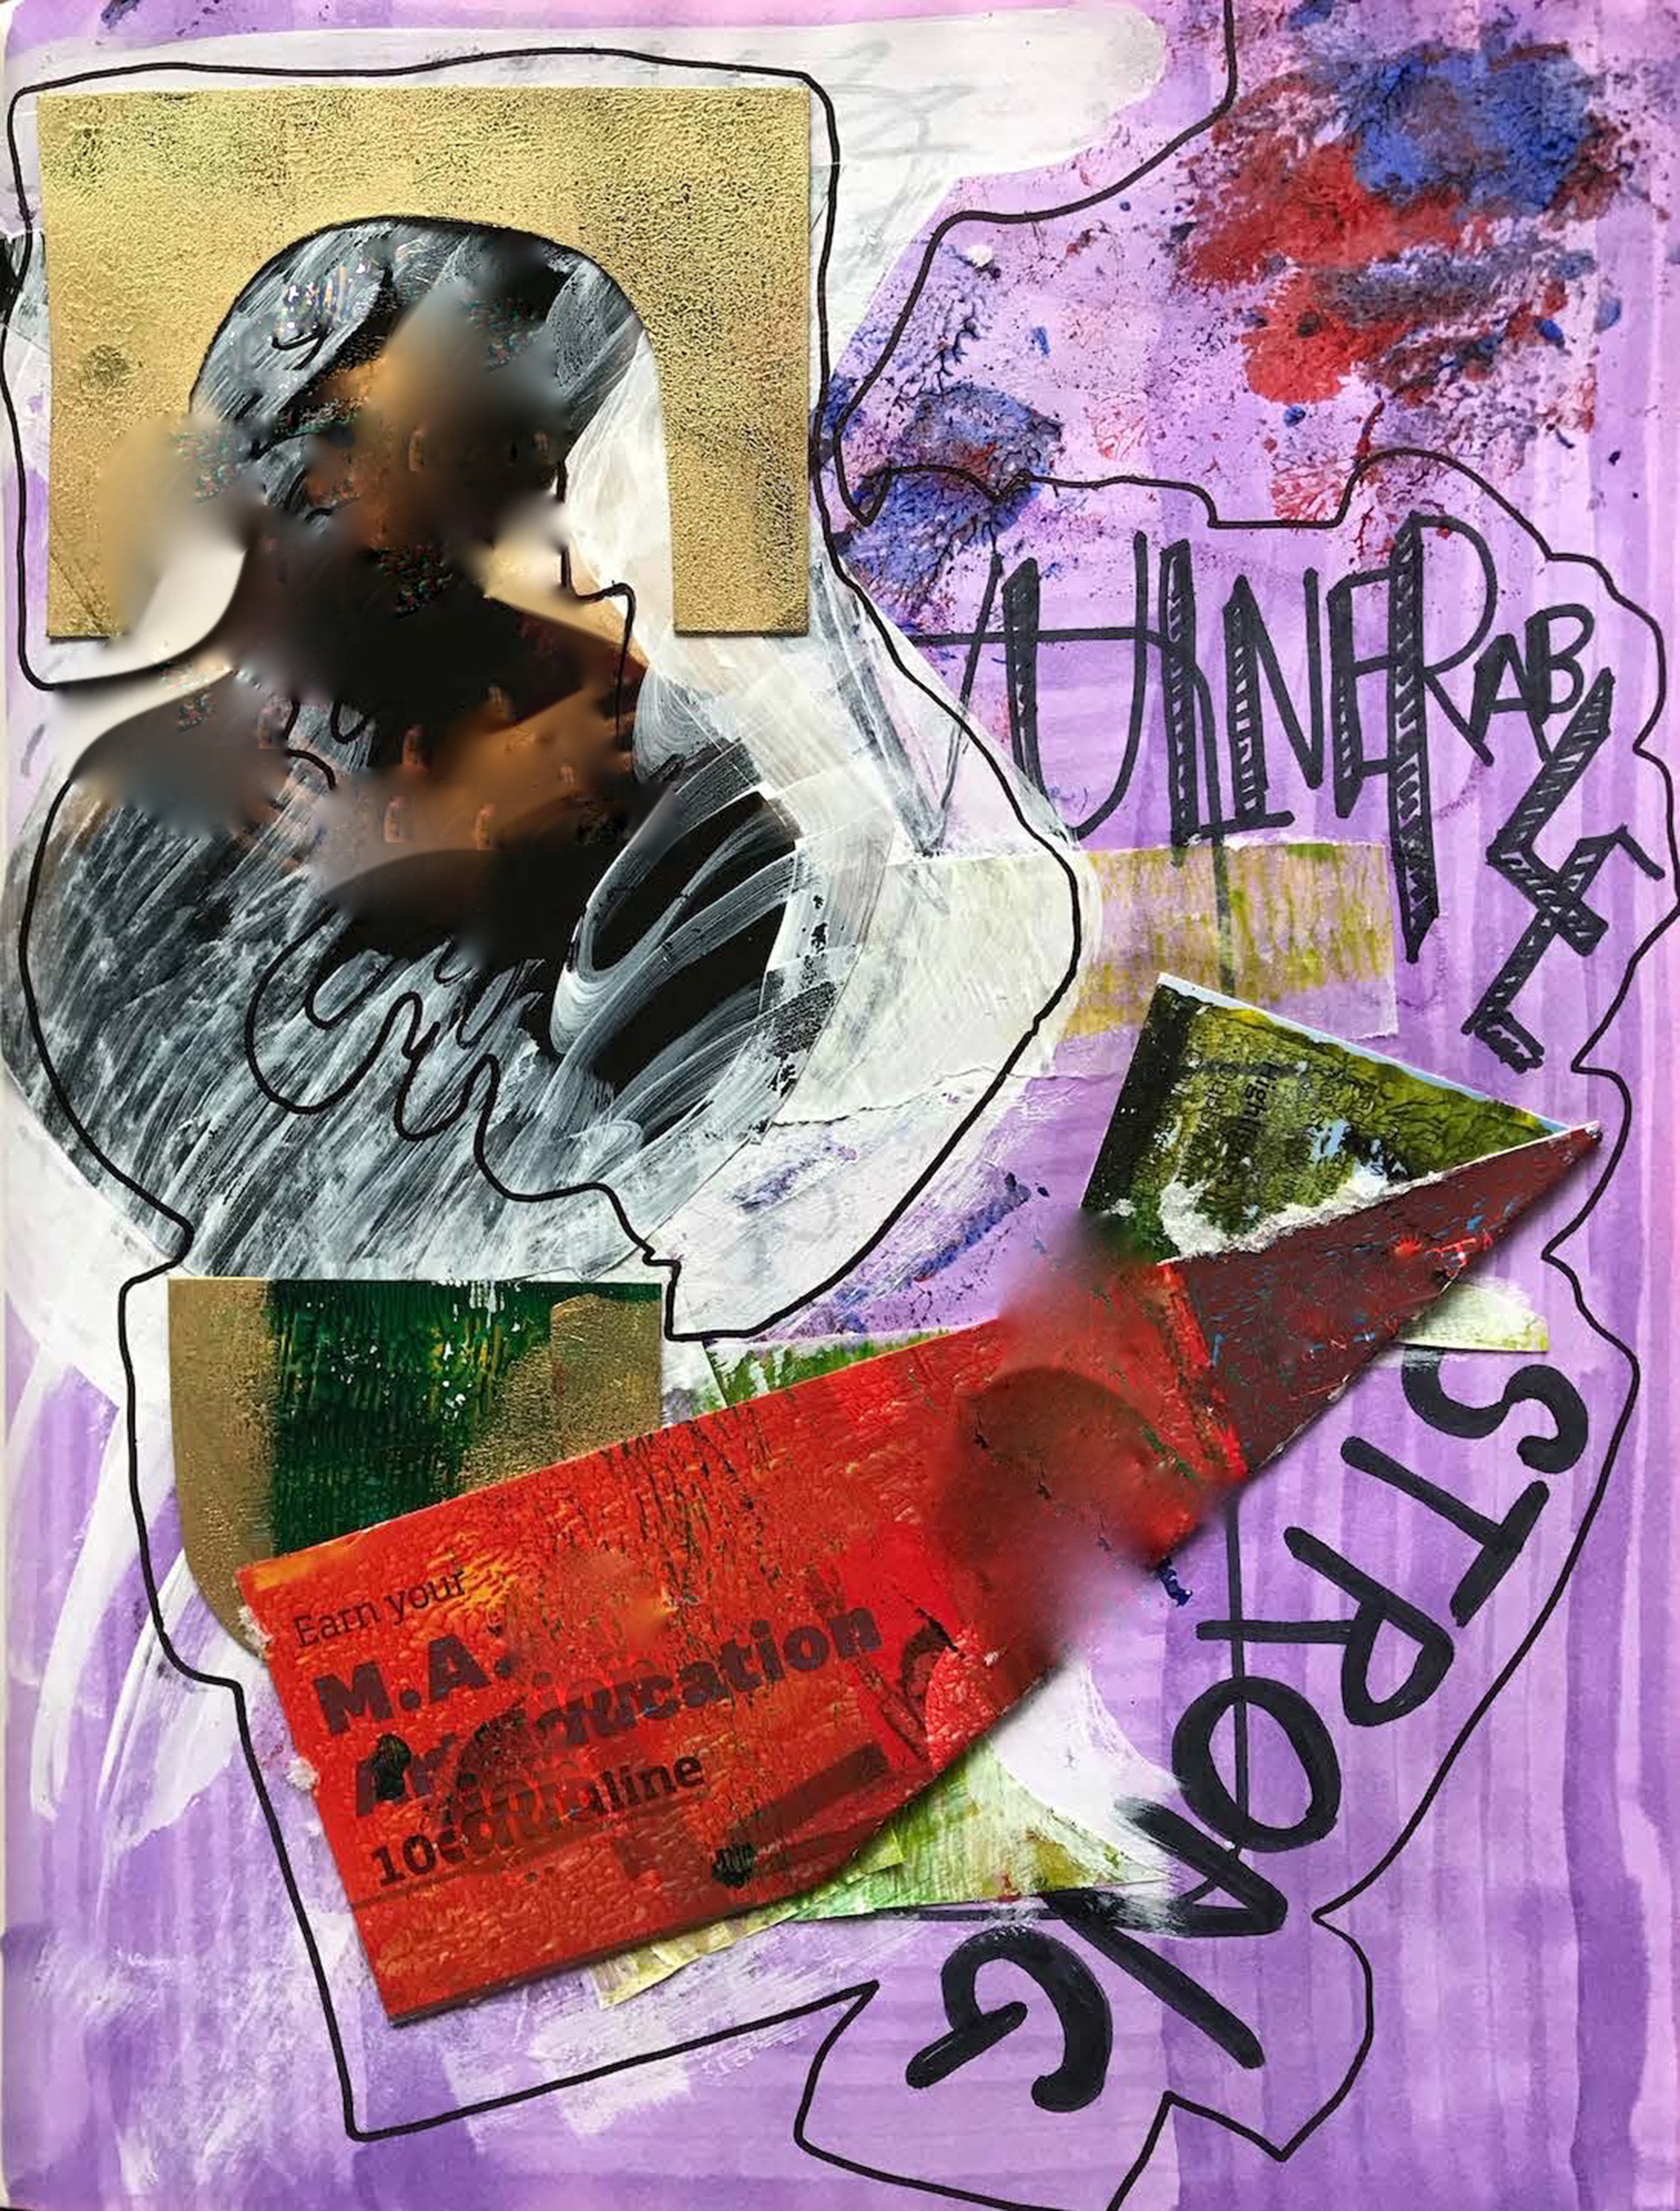 Cover art by Kelly Clark/Keefe, Vulnerable Detail, Mixed media on paper, 8.5 x 11.